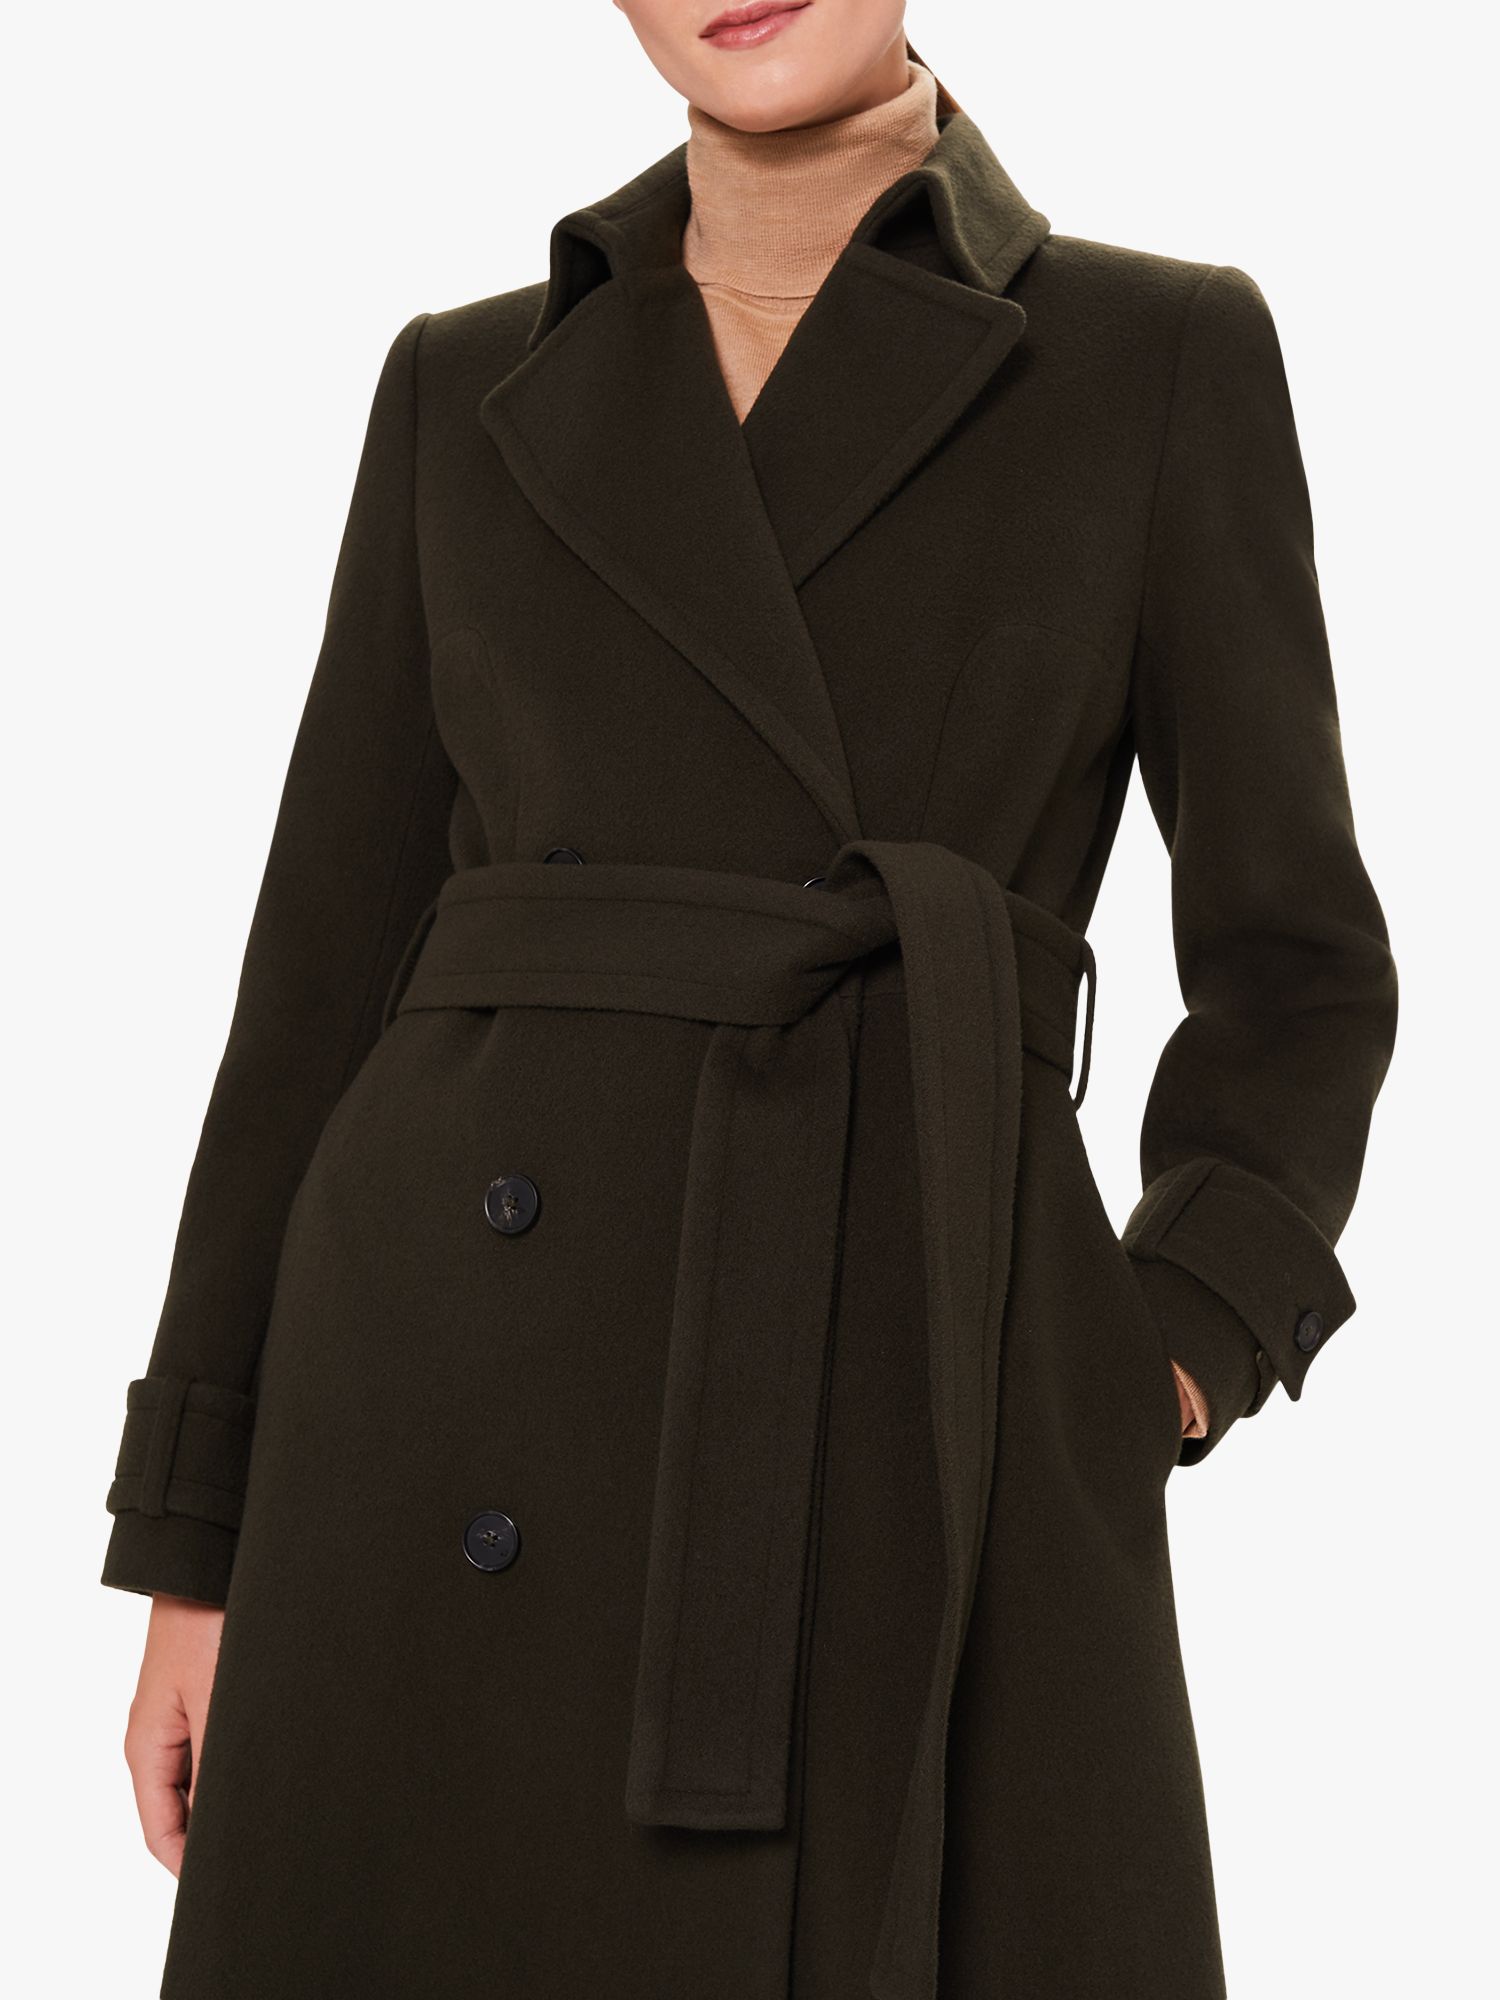 Hobbs Lori Wool Cashmere Blend Belted Long Coat Olive At John Lewis And Partners